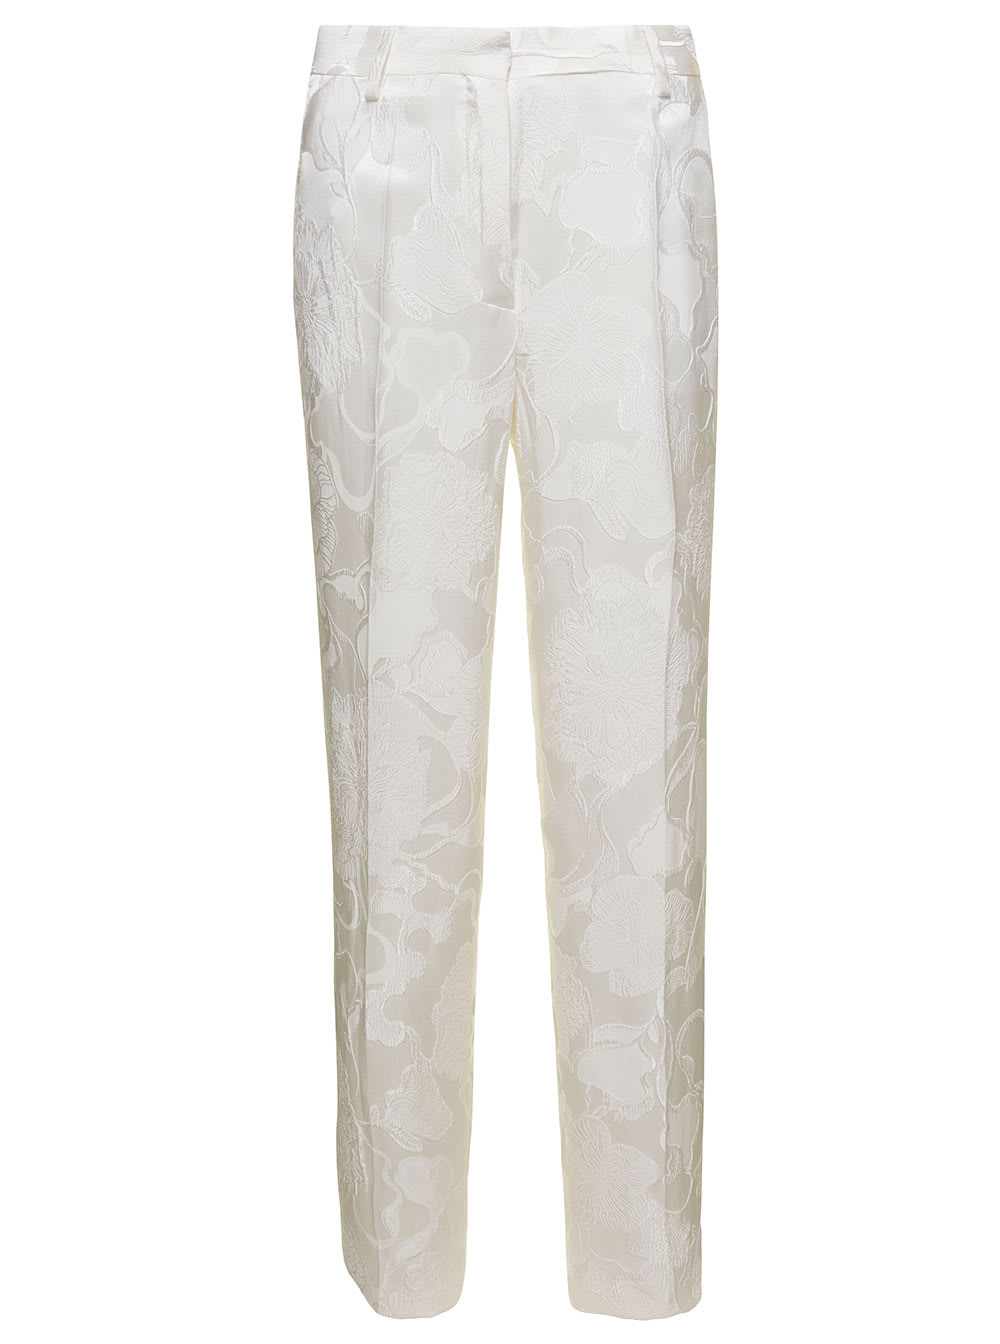 DRIES VAN NOTEN WHITE TAILORED TRAUSERS WITH FLORAL JACQUARD MOTIF ALL-OVER IN SILK BLEND WOMAN